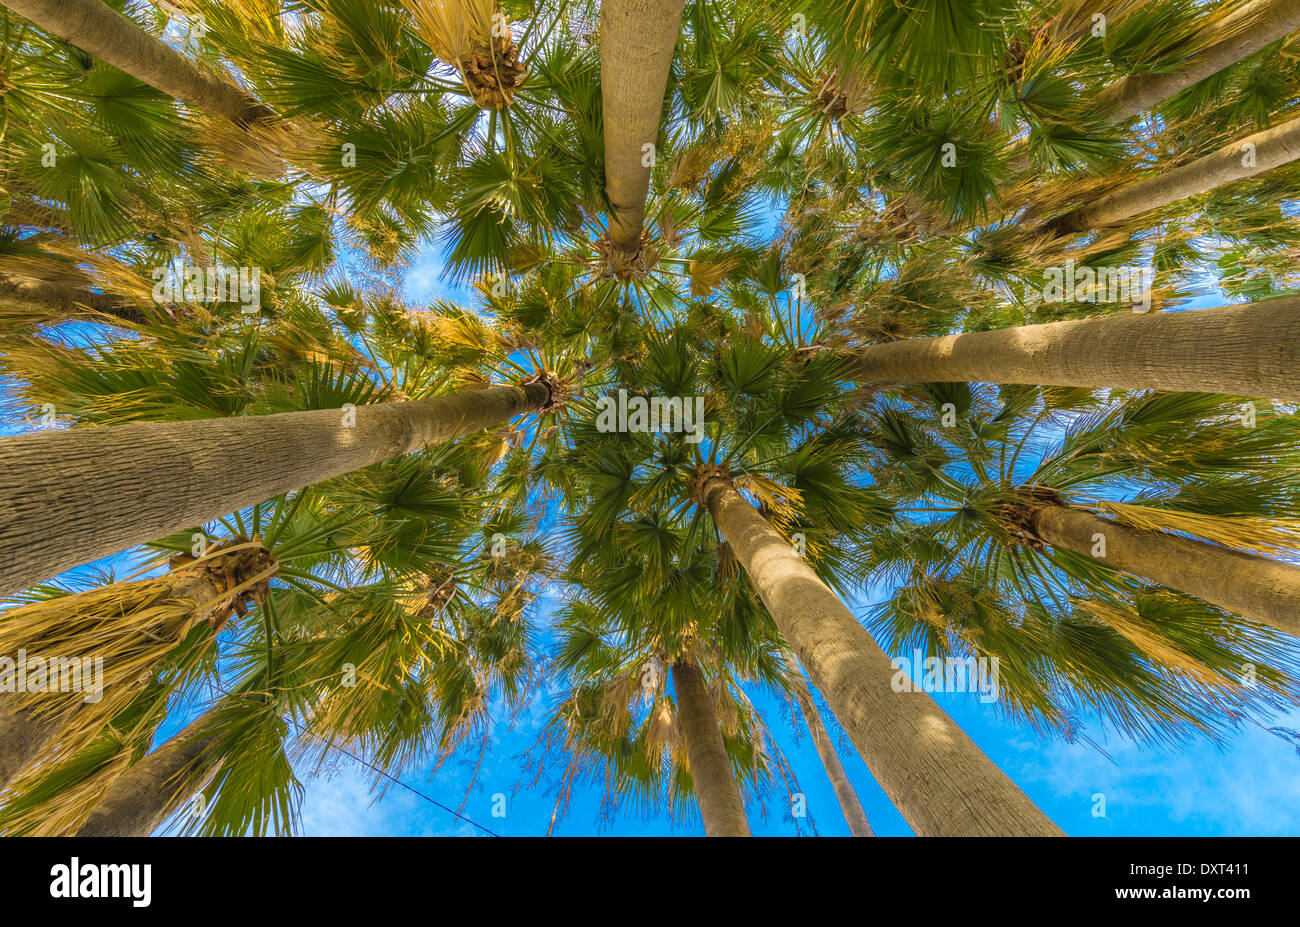 View from under some Palm trees in Cannes, France Stock Photo